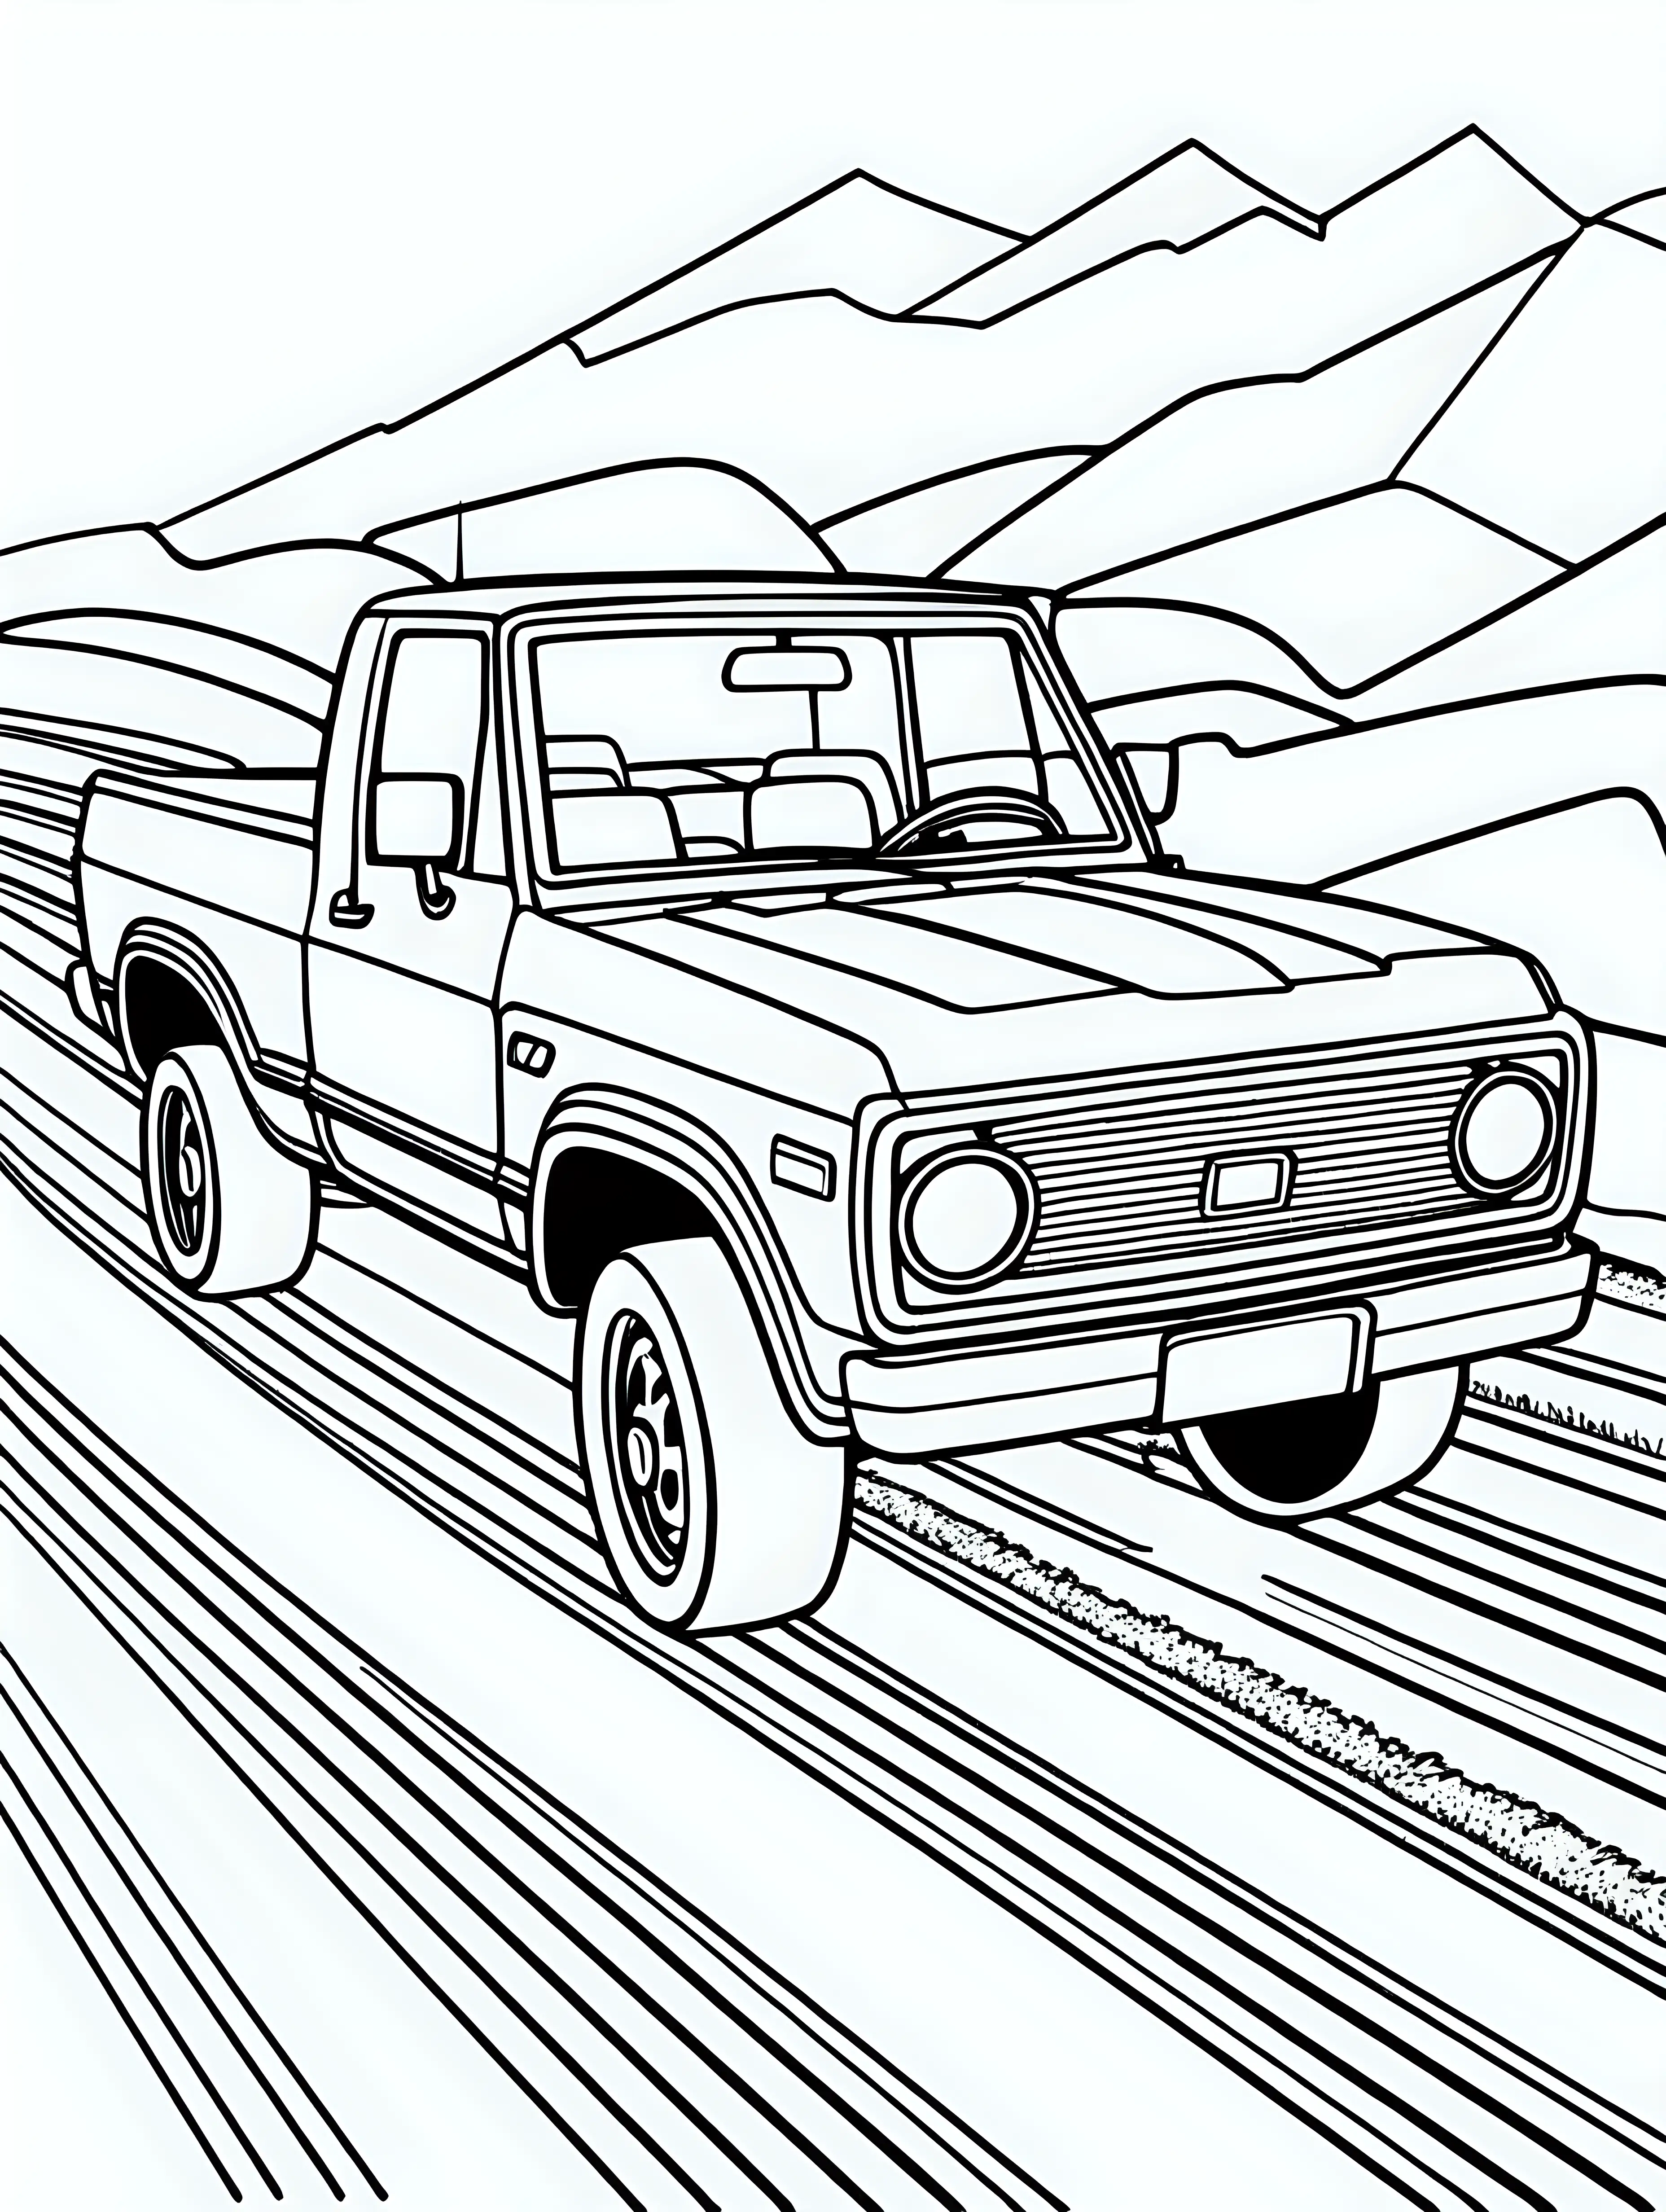 Car Coloring Page for Kids on Track